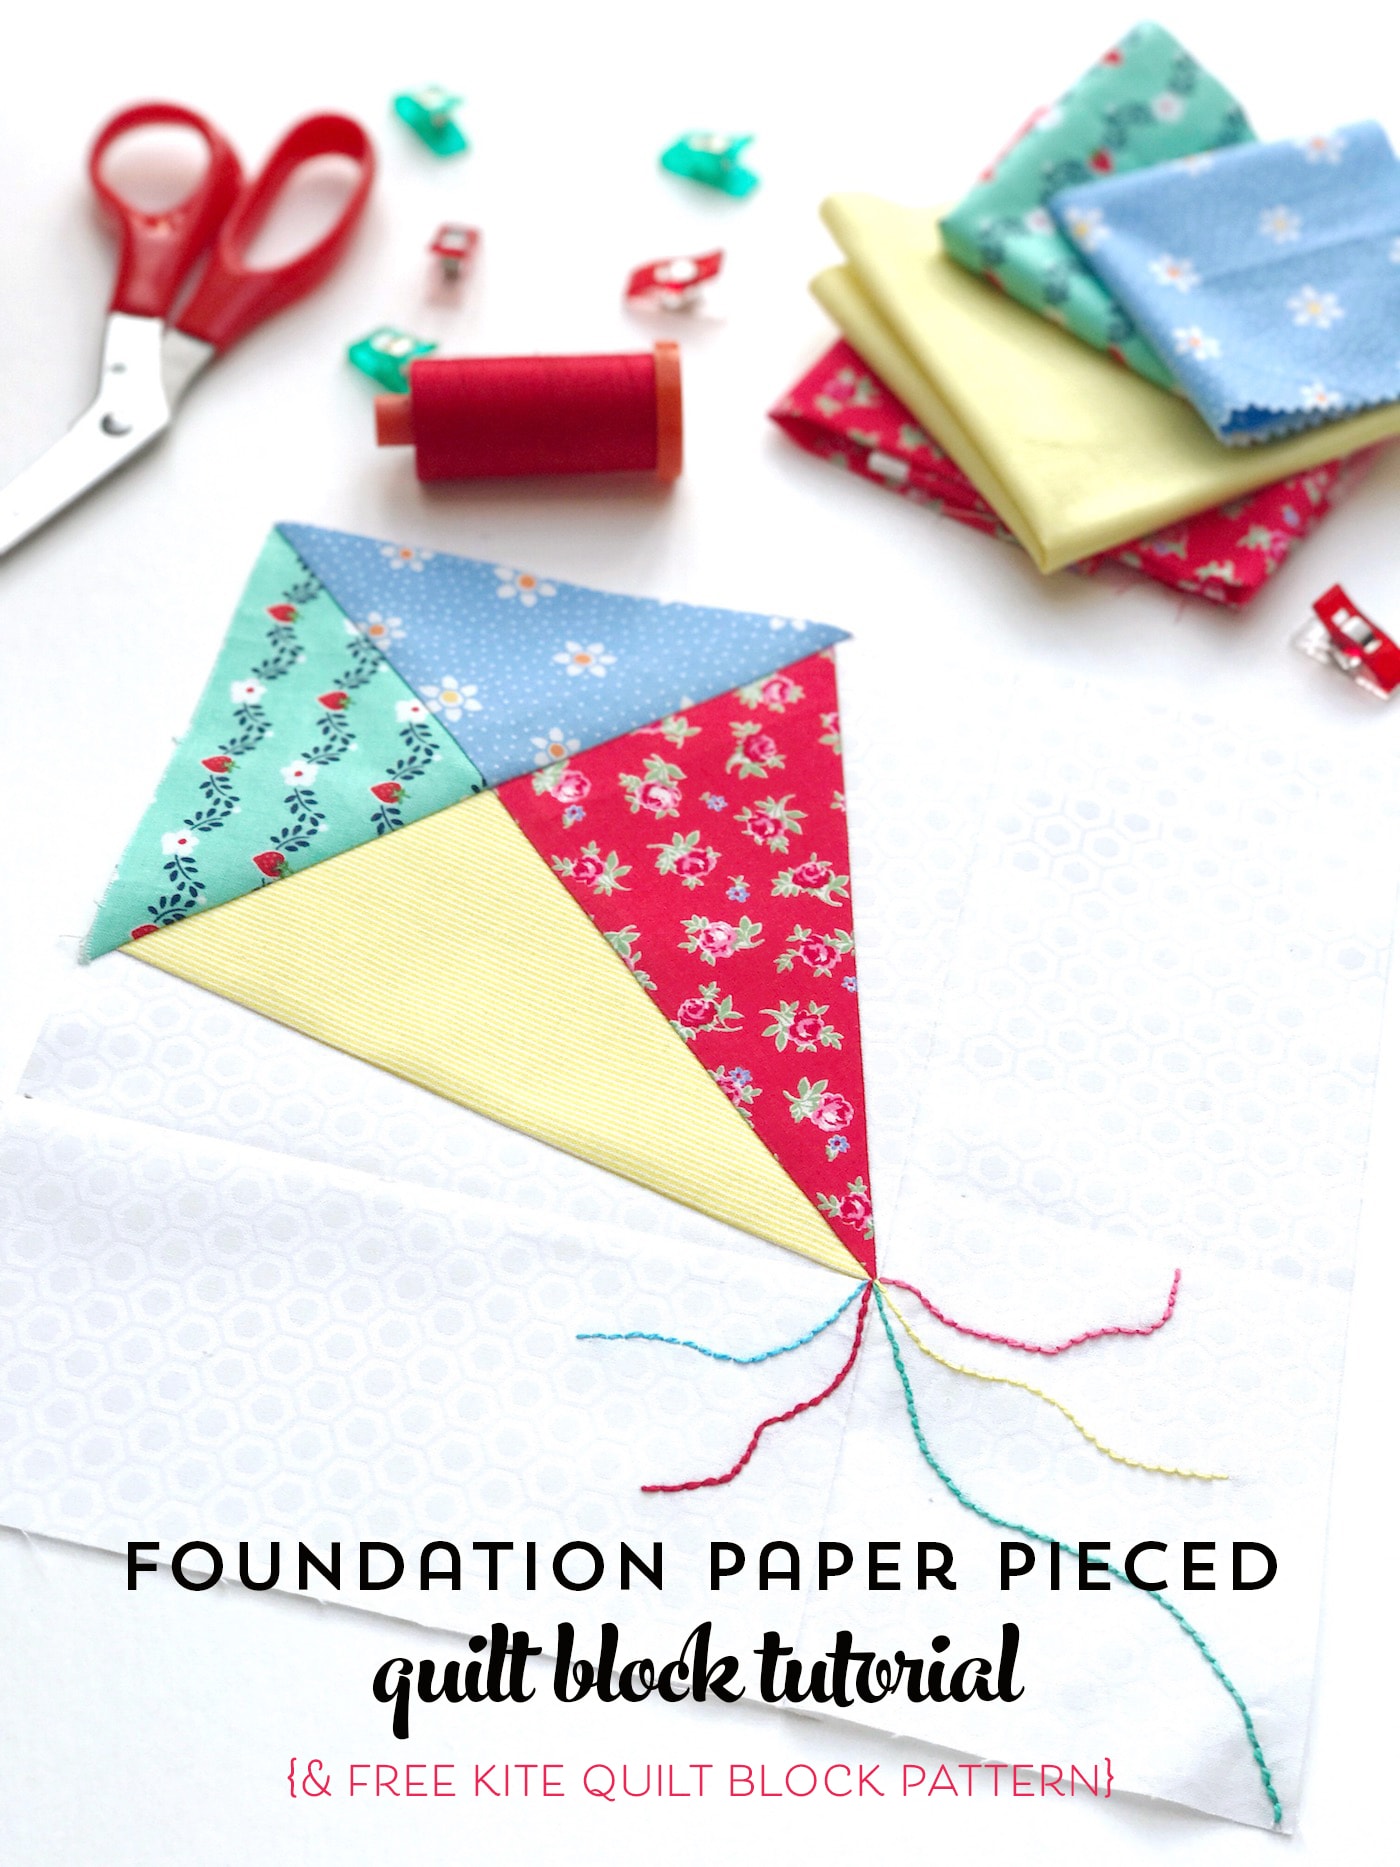 Pack of Paper Pieces Quilting Rulers and Templates for Patchwork